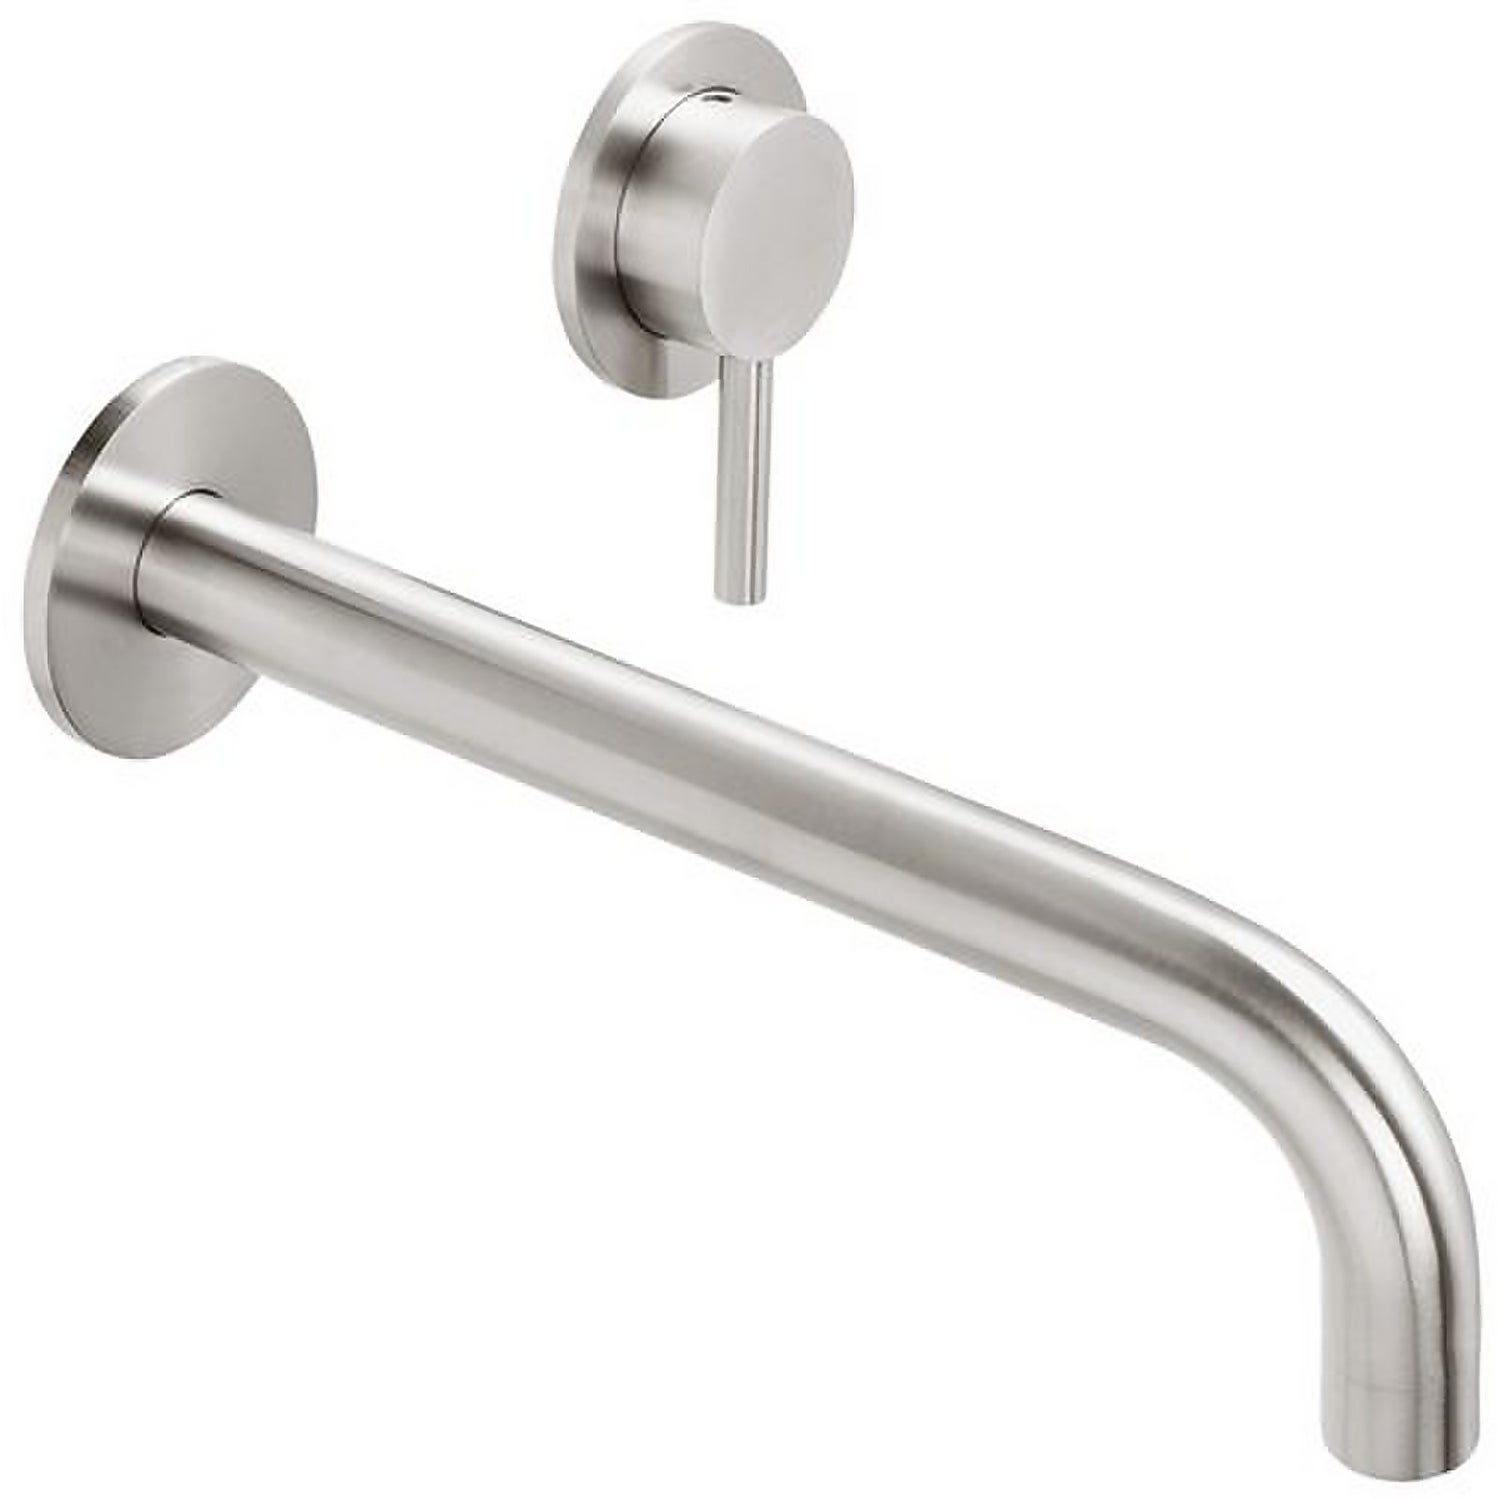 Forge Stainless Steel Wall Mounted Basin Mixer Tap